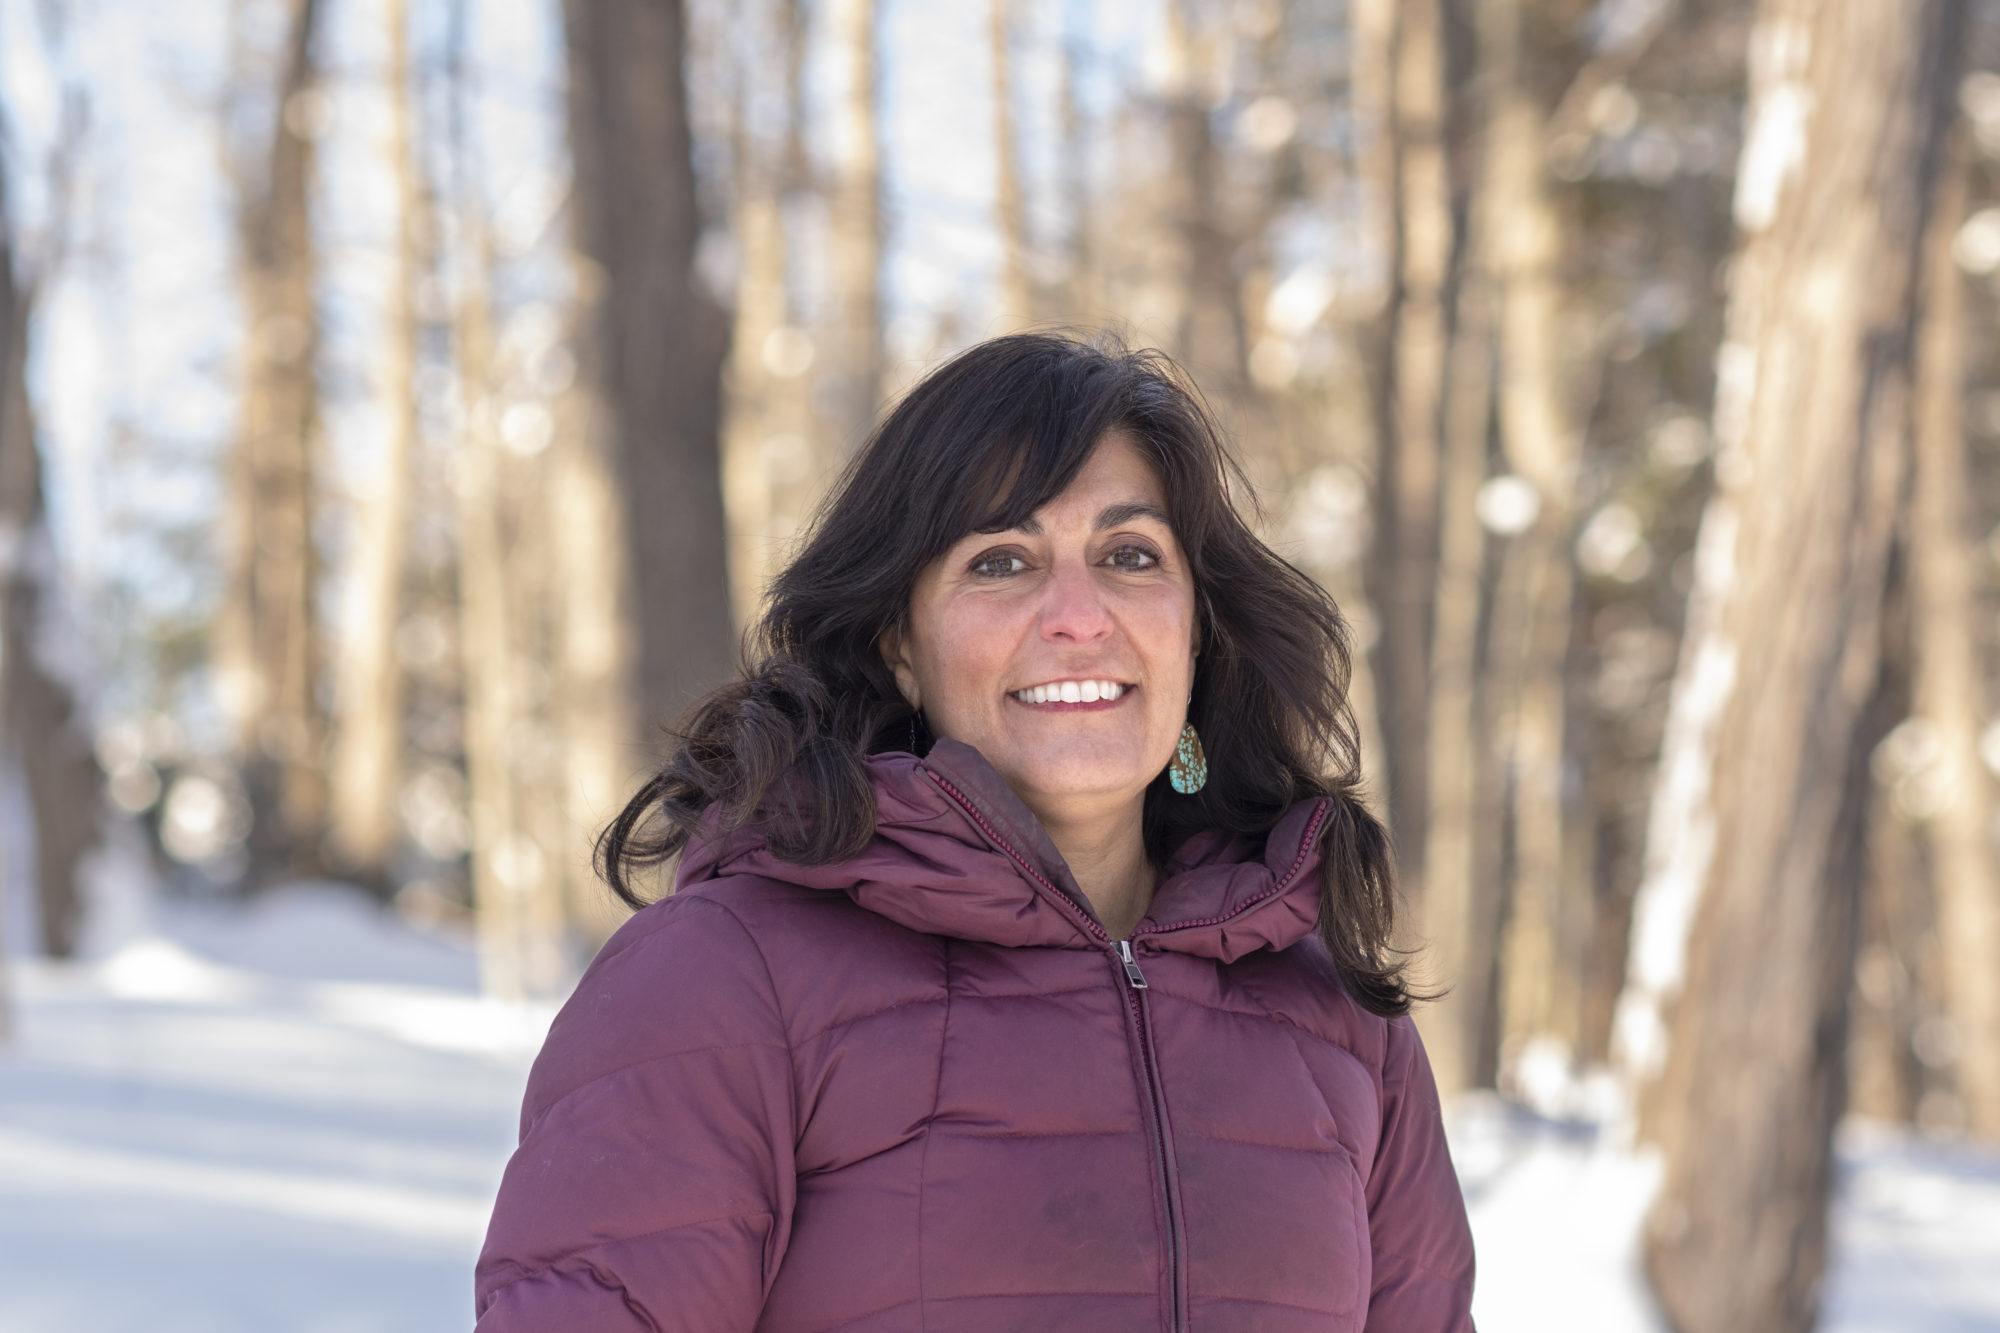 Danielle Fitzko, Vermont’s new Director of Forests